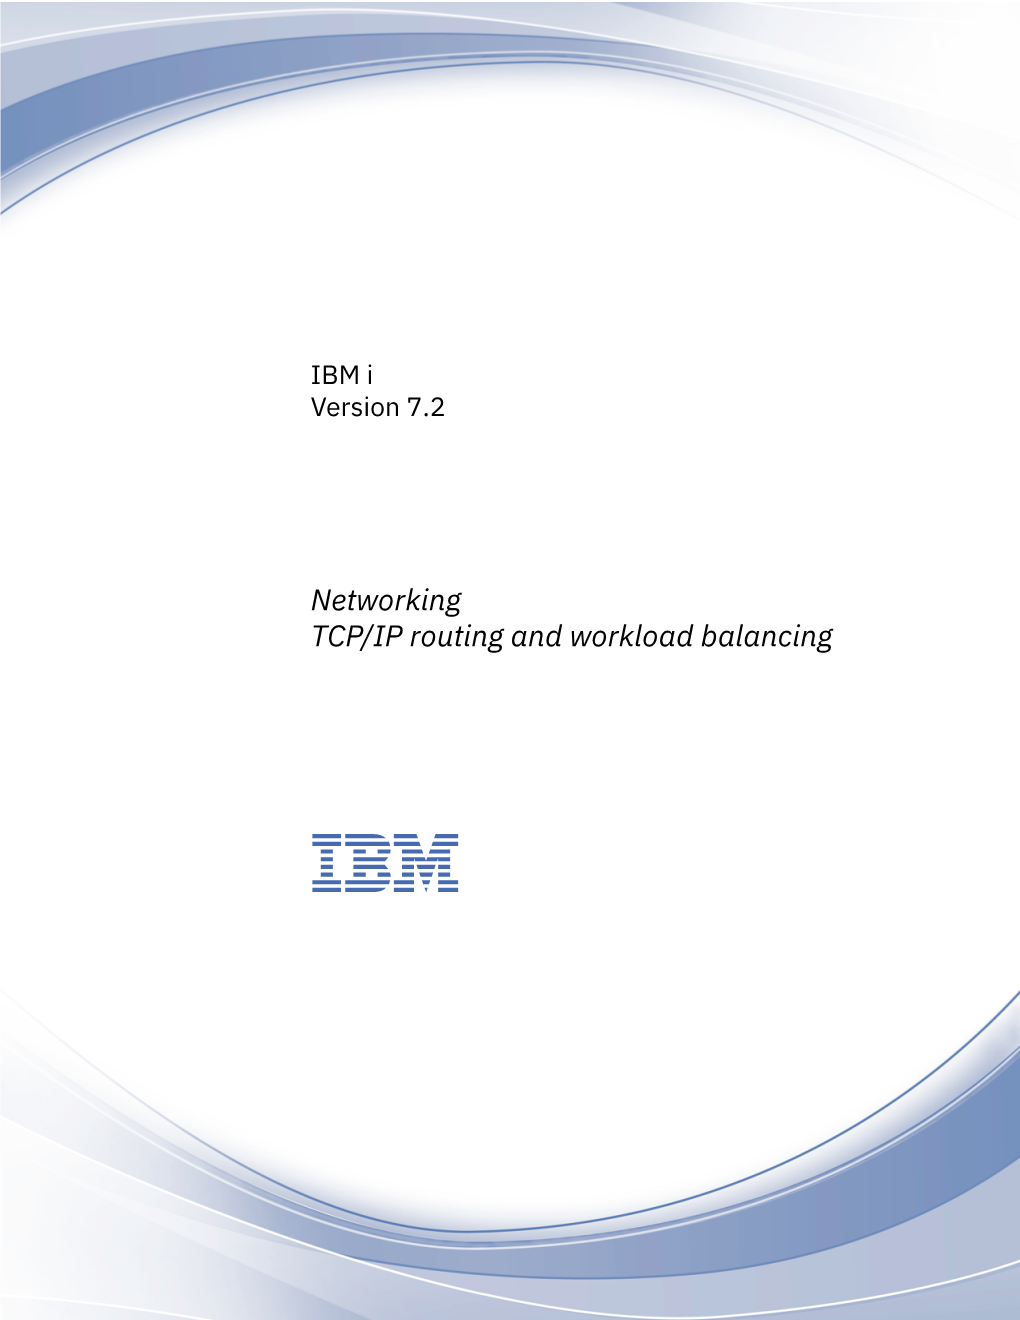 Networkingtcp/IP Routing and Workload Balancing